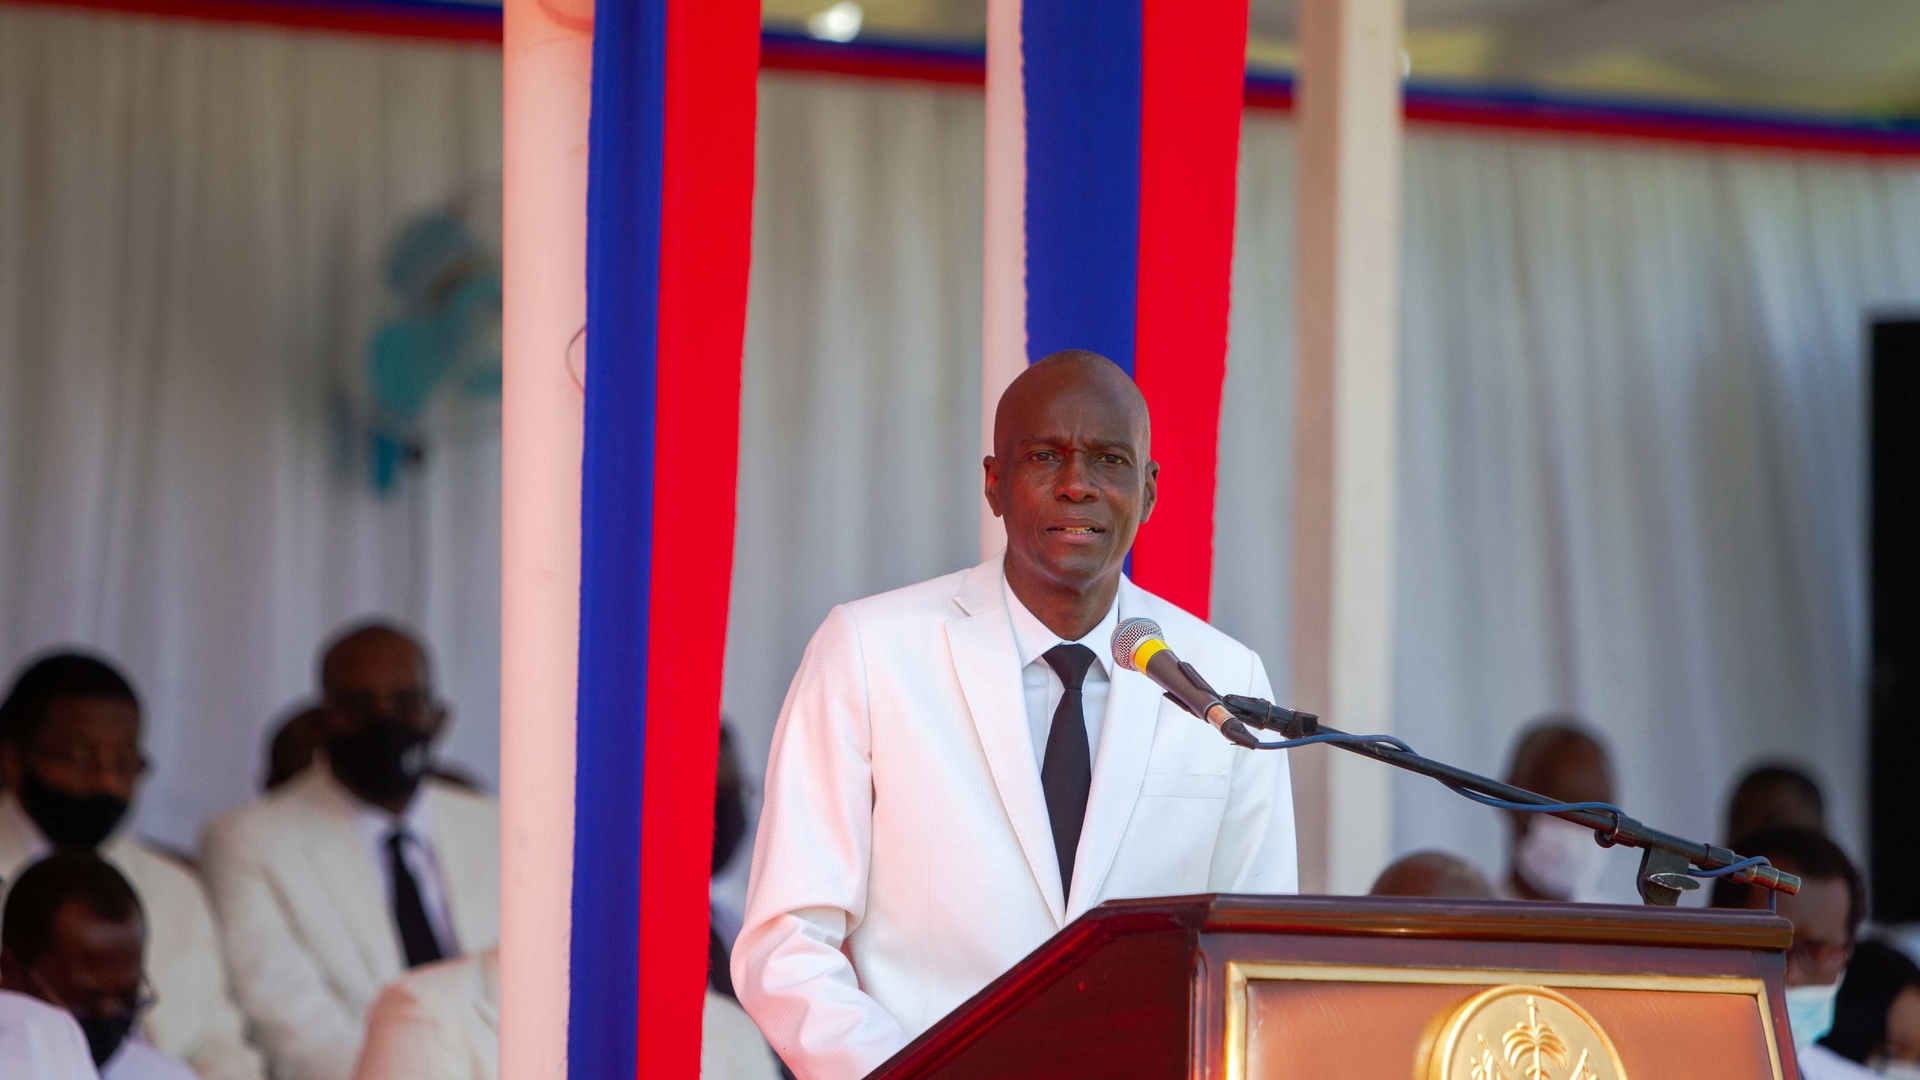 Moise calls for dialogue to sign a 25-year political agreement in Haiti